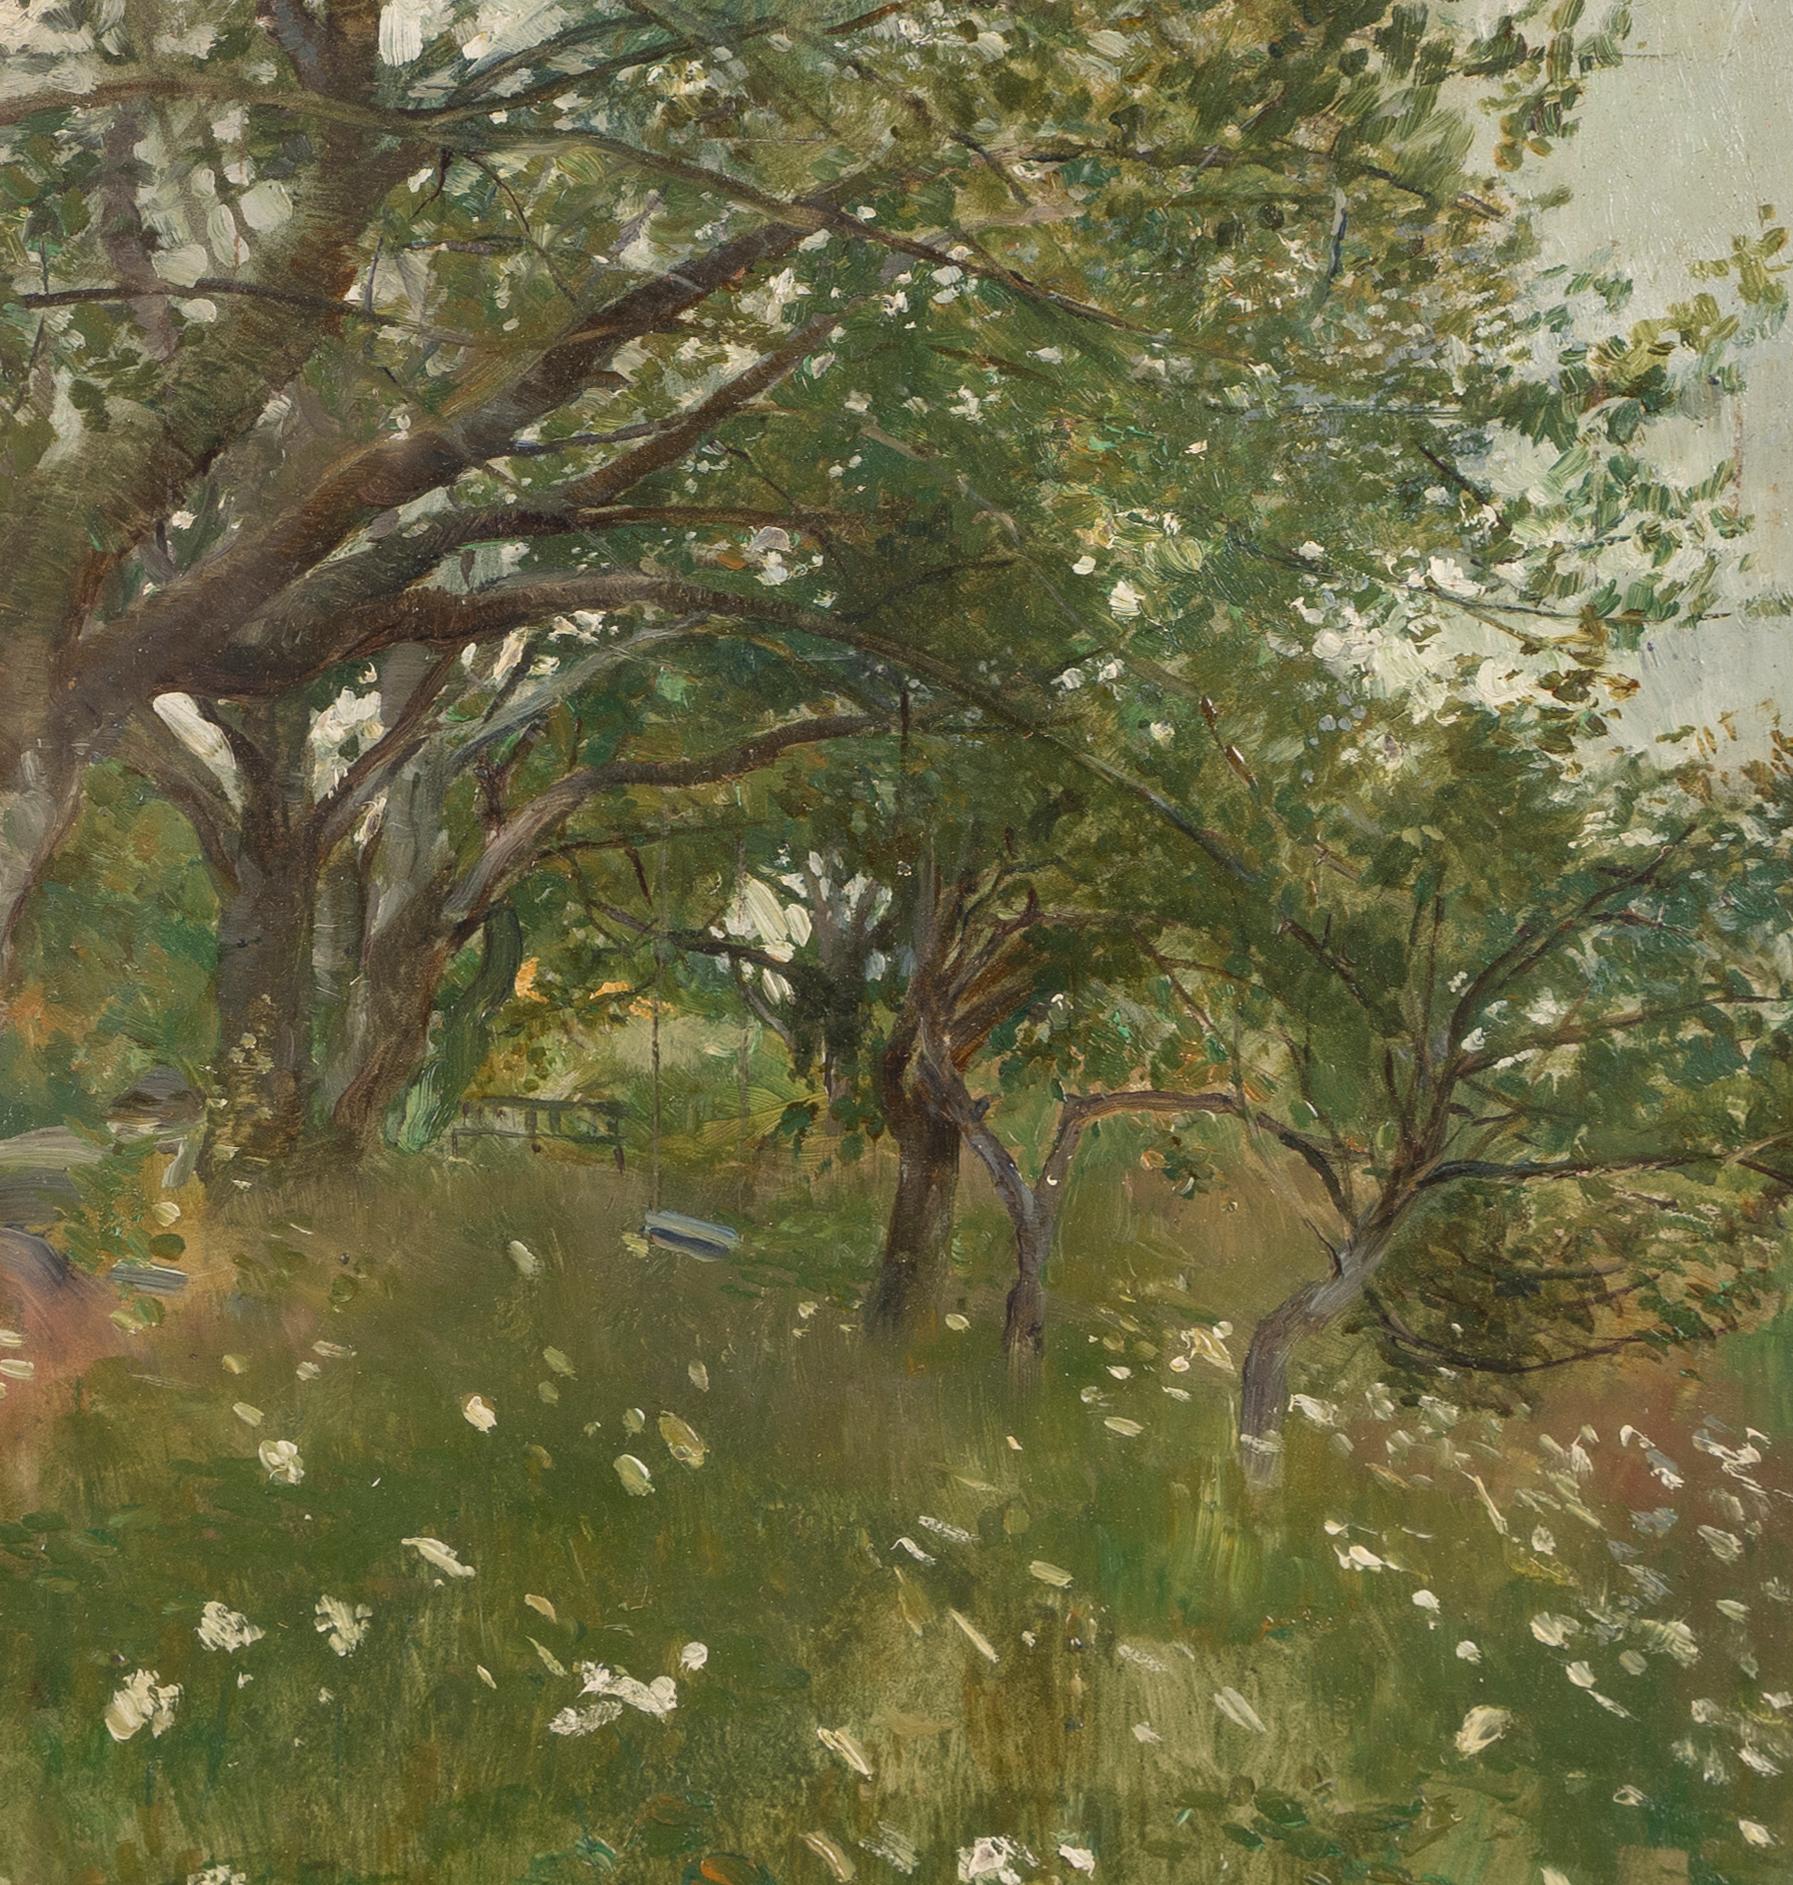 Antique American impressionist flower landscape oil painting by Edward S Annison.  Oil on board, circa 1910.  Signé.  Image size, 9L x 12H.  Housed in a period  frame.